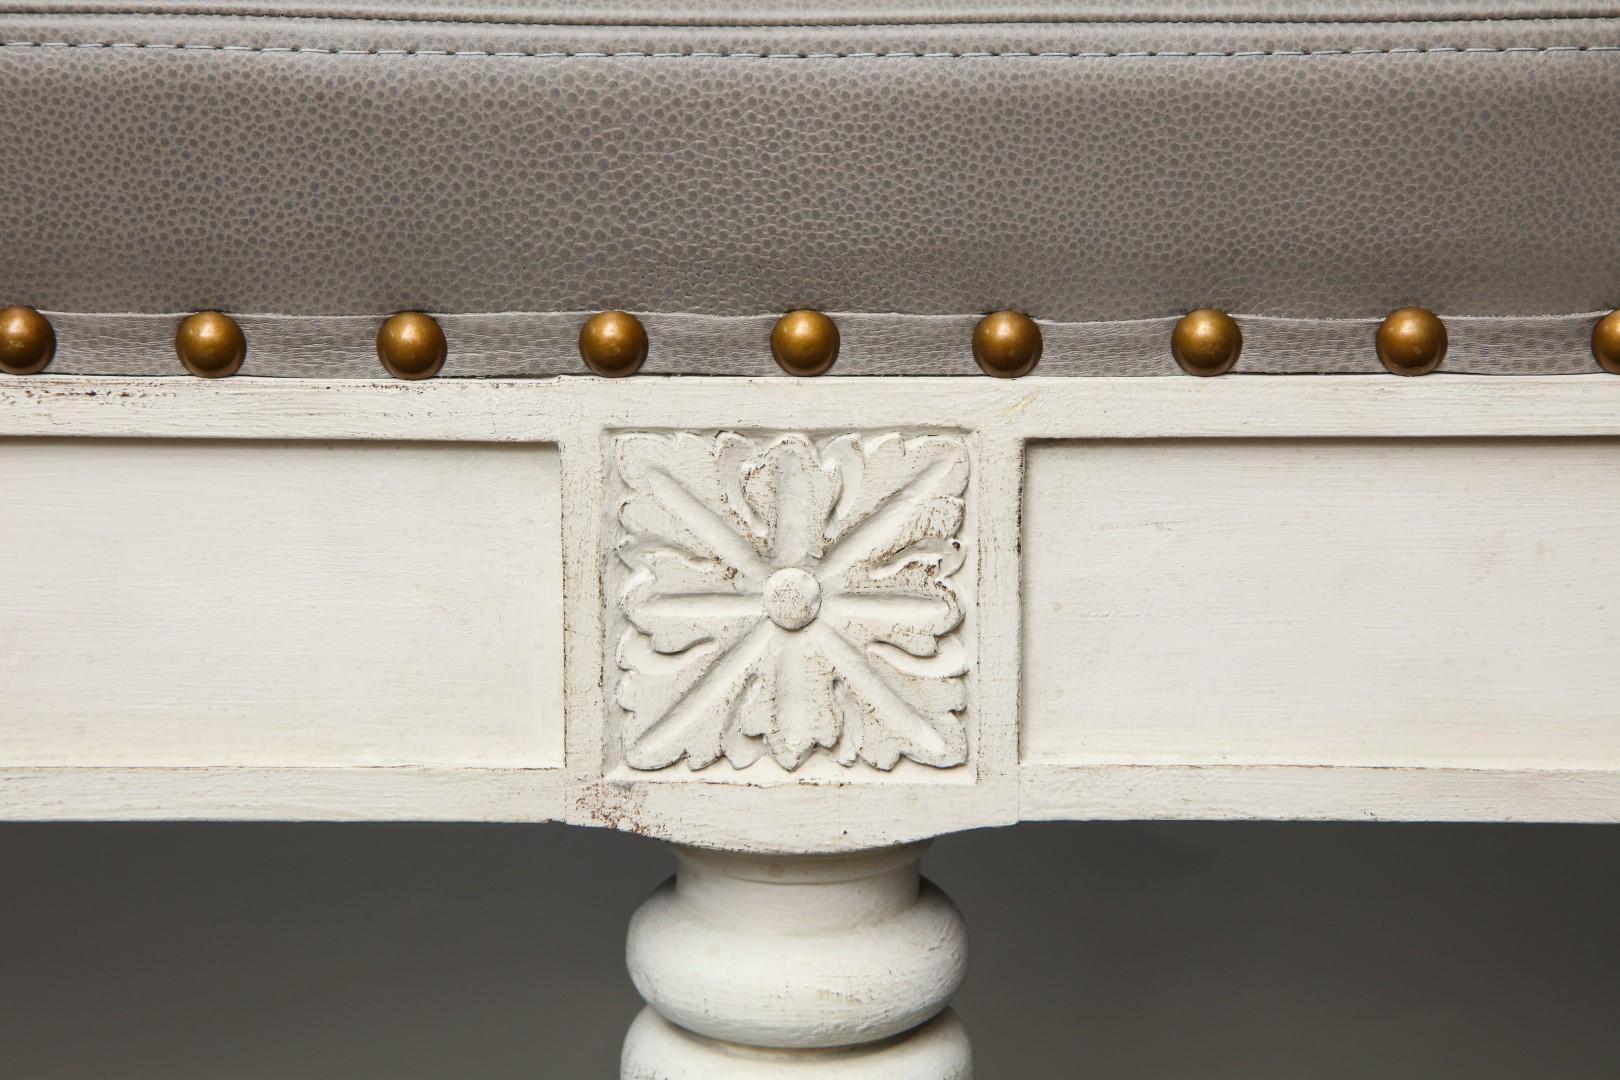 American Montreuil Bench, Louis XVI Style Bench with Leather Upholstery, by David Duncan For Sale